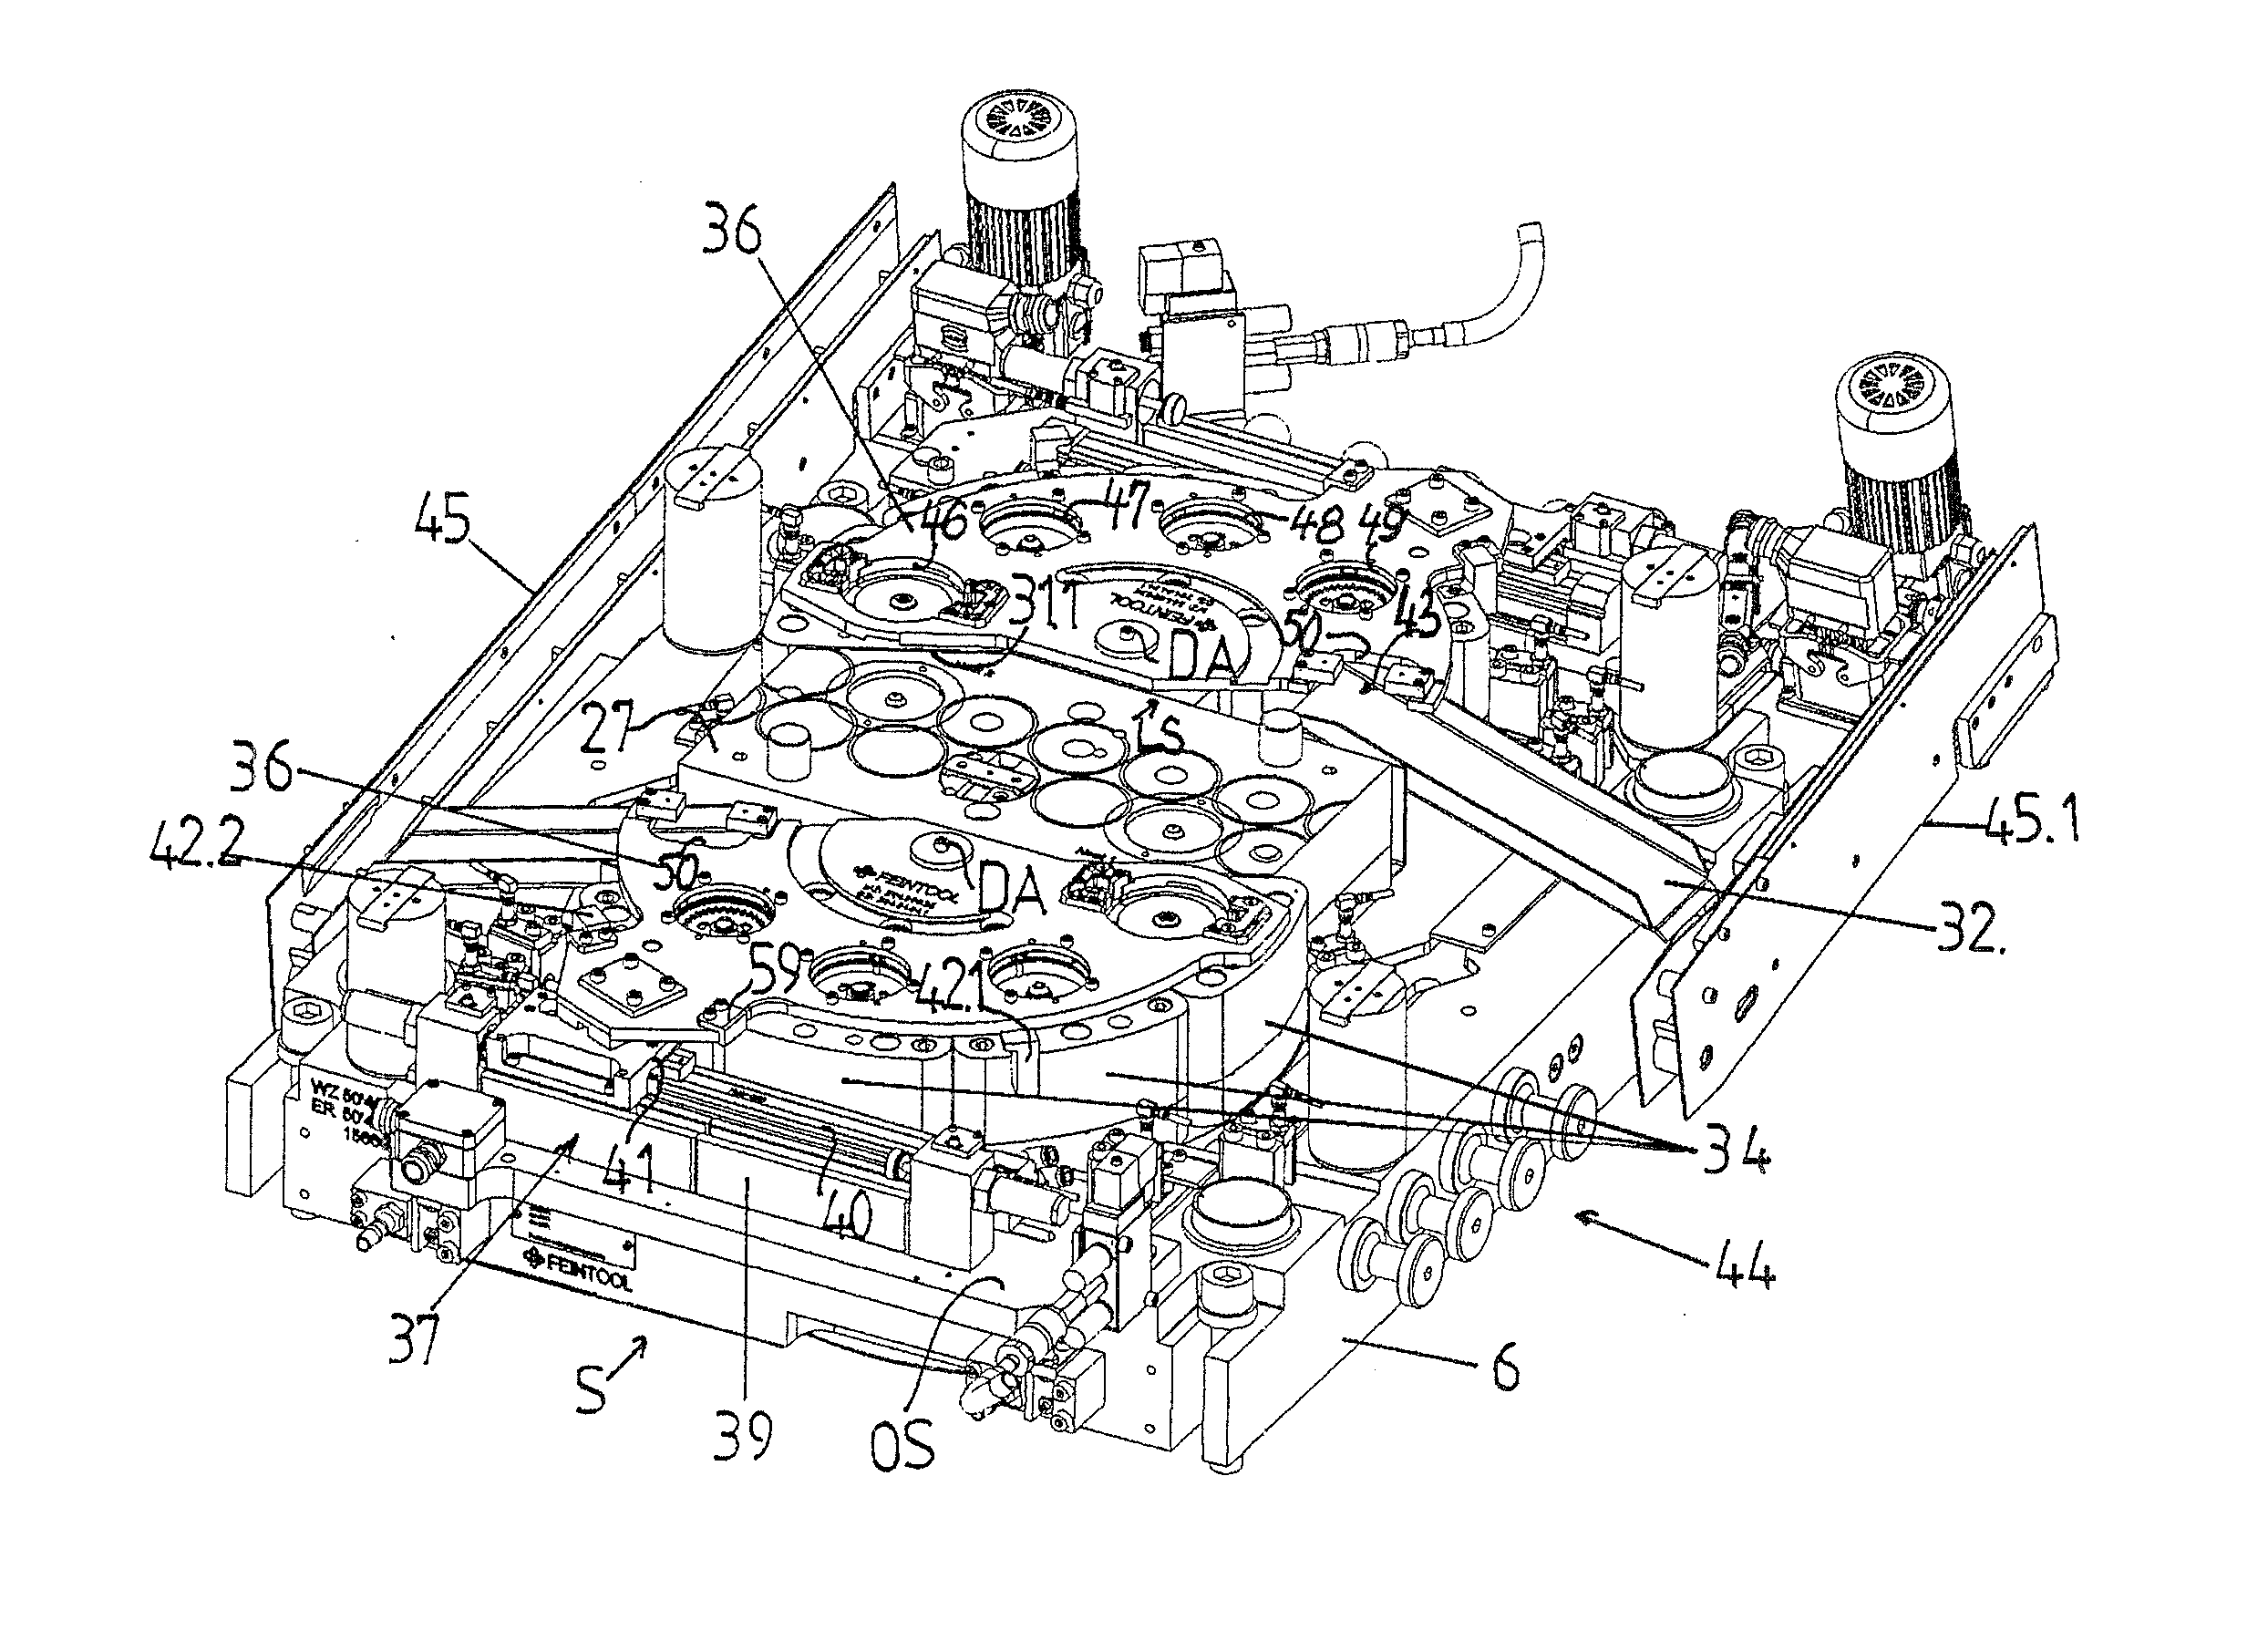 Device and method for transferring workpieces into and out of a tool